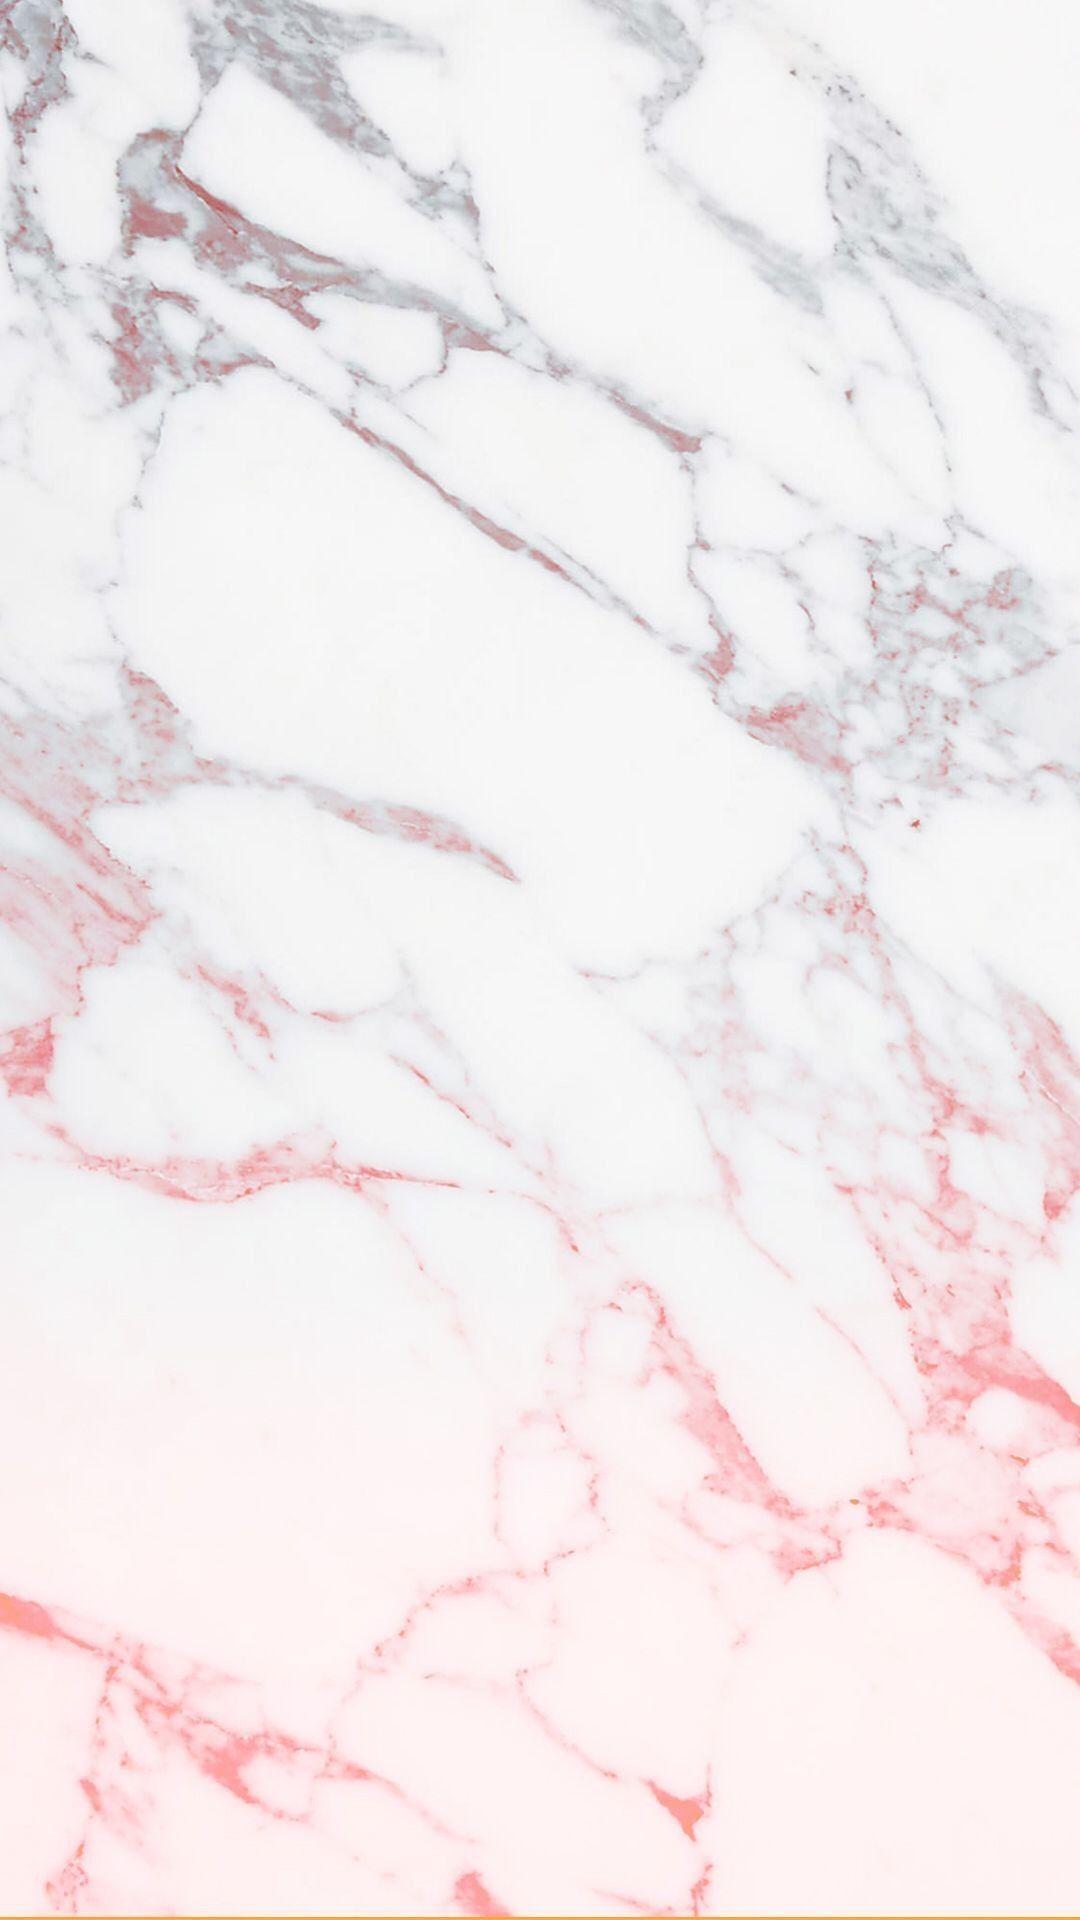 Marble Wallpaper. Marble iphone wallpaper, Pretty